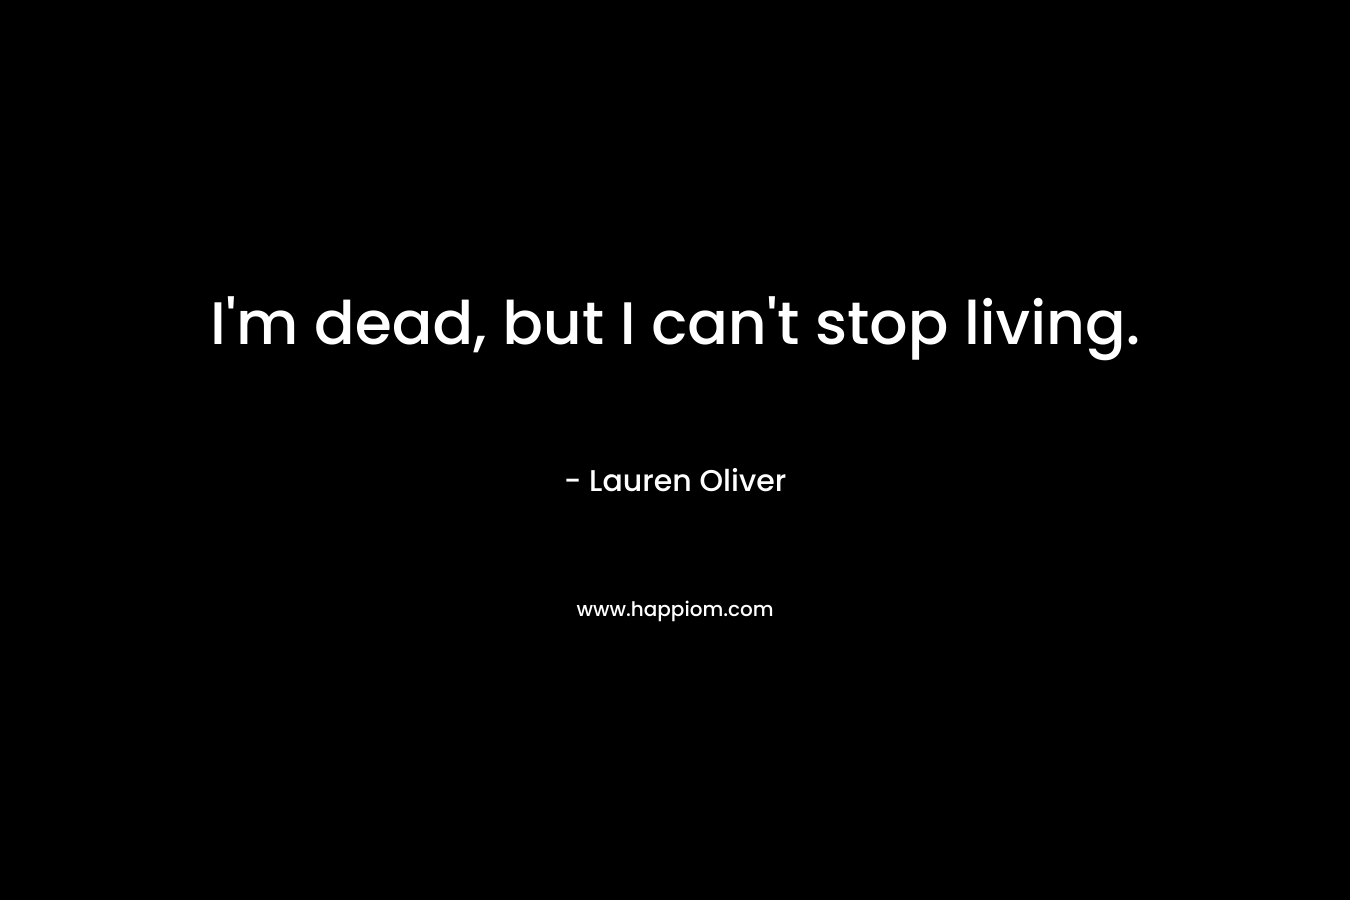 I'm dead, but I can't stop living.